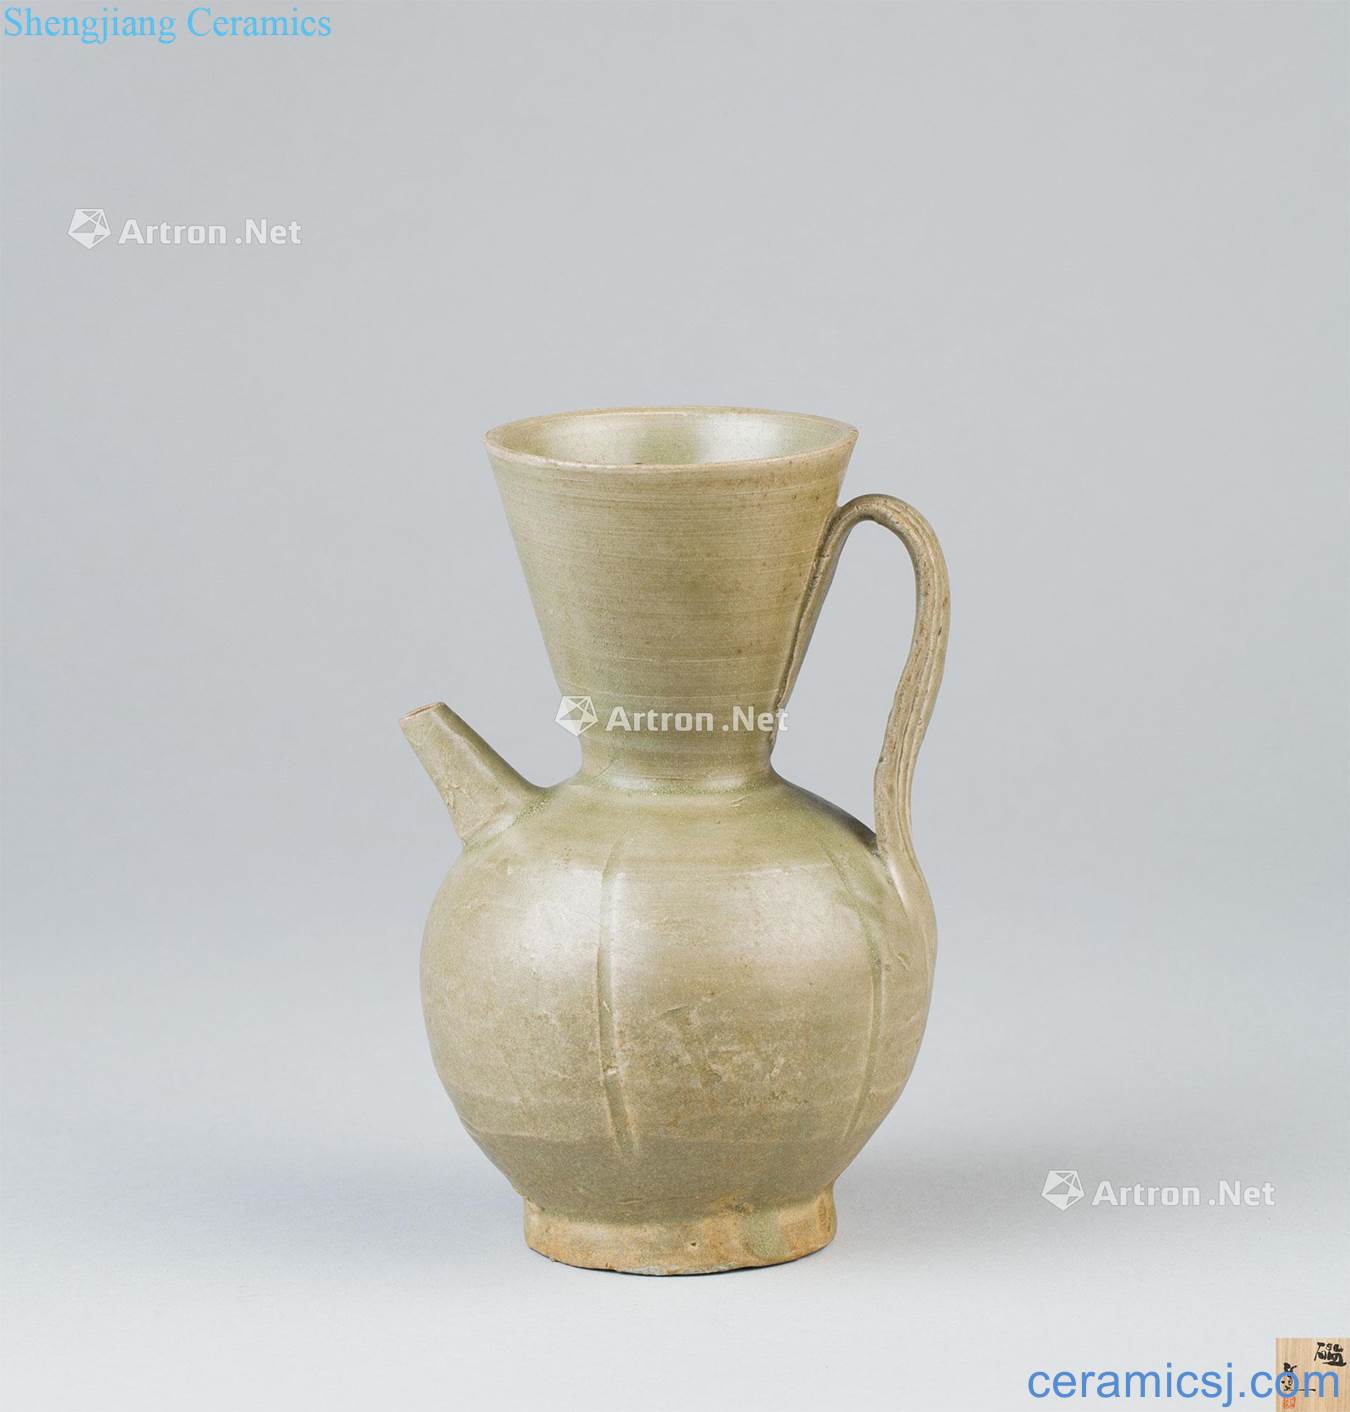 The tang dynasty (618-907) of the kiln melon prismatic ewer